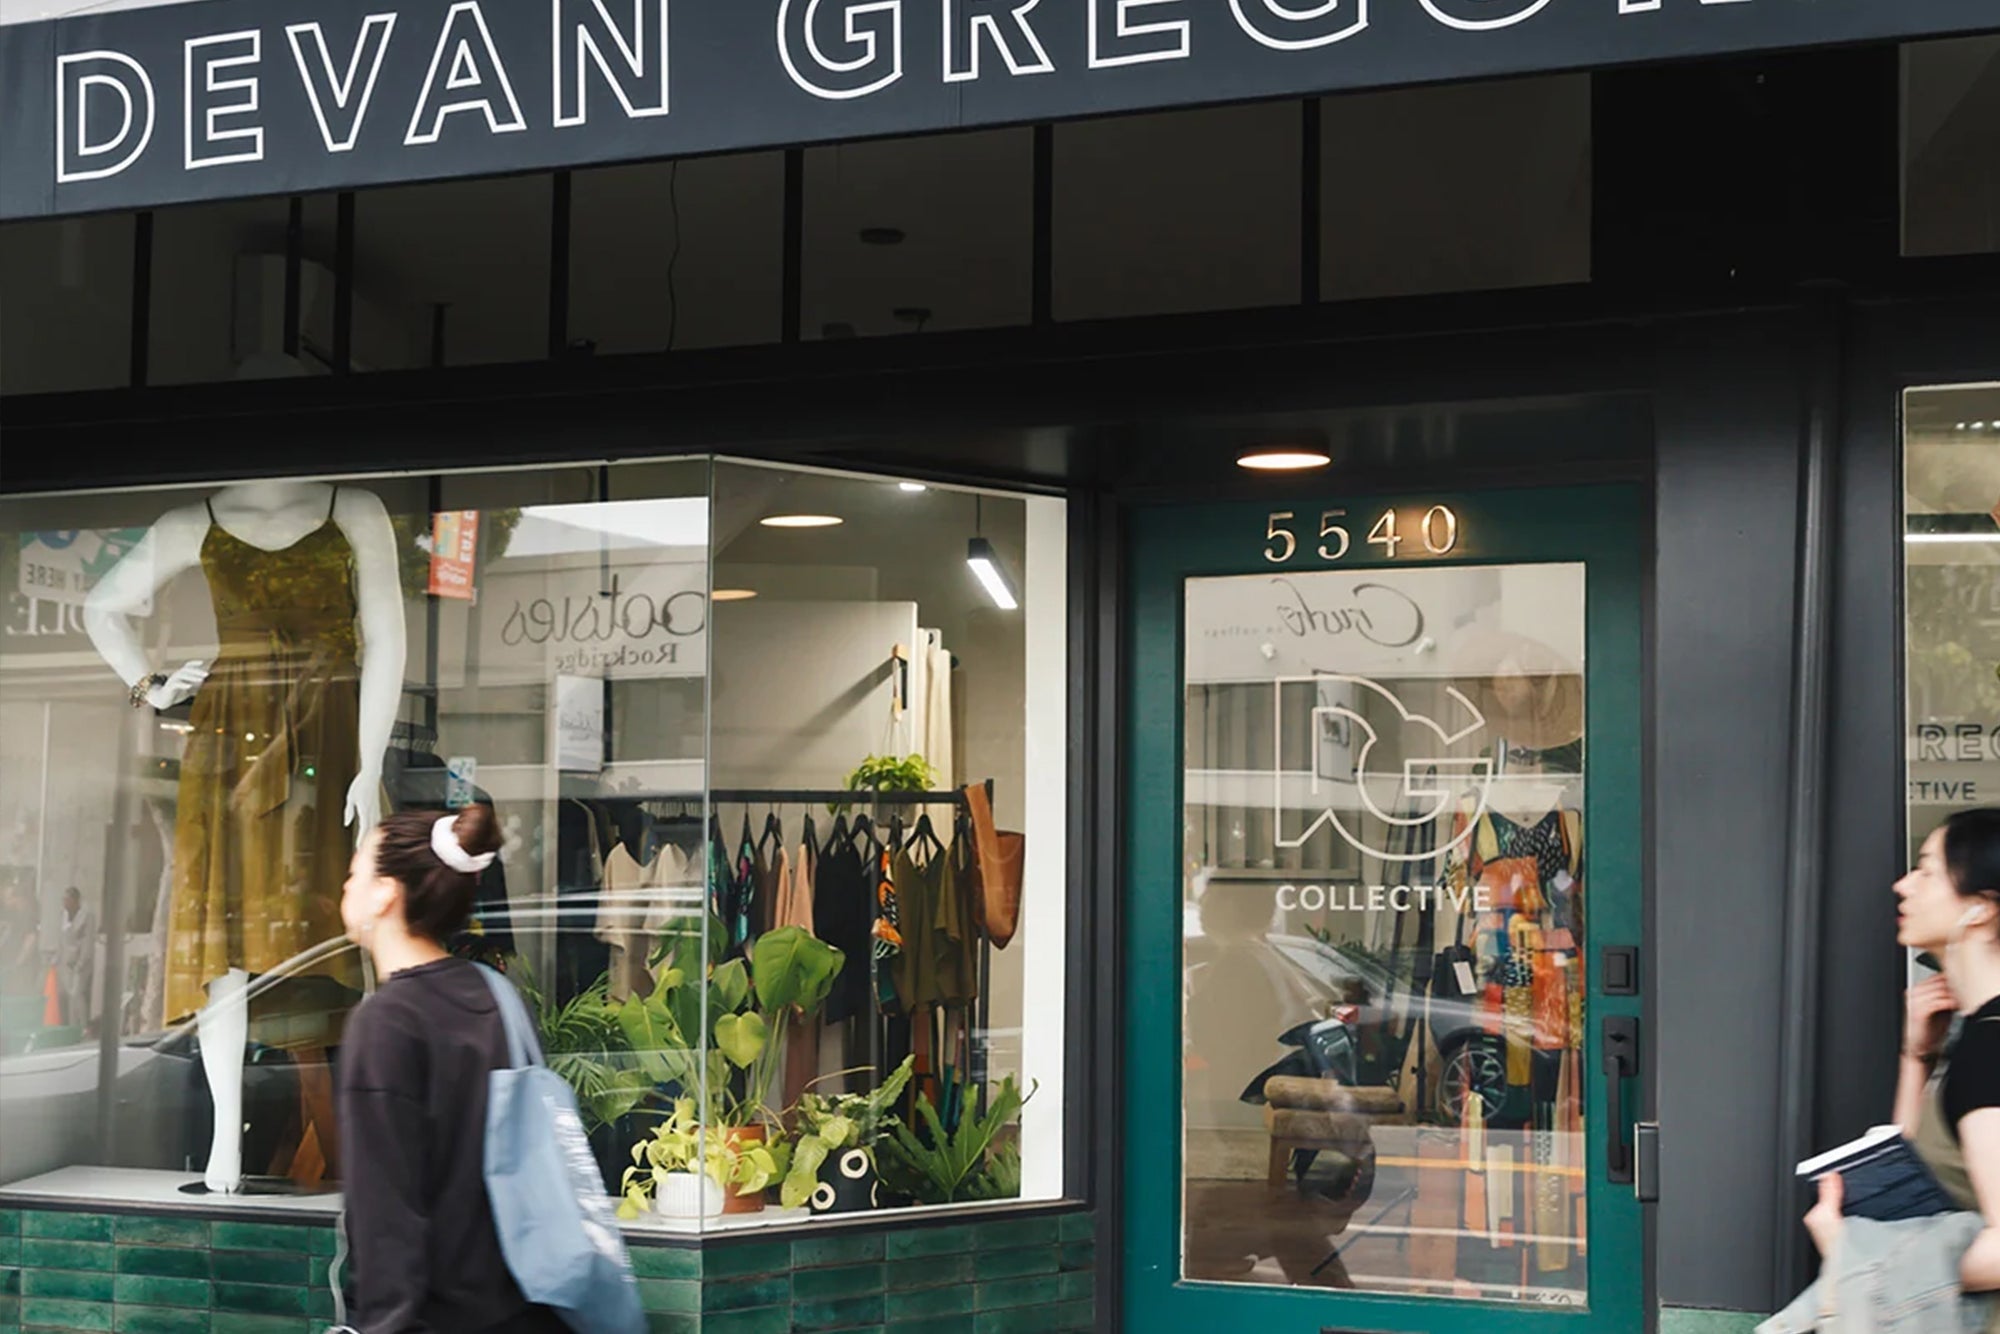 The Struggle of Being a Small Business in Oakland - DEVAN GREGORI